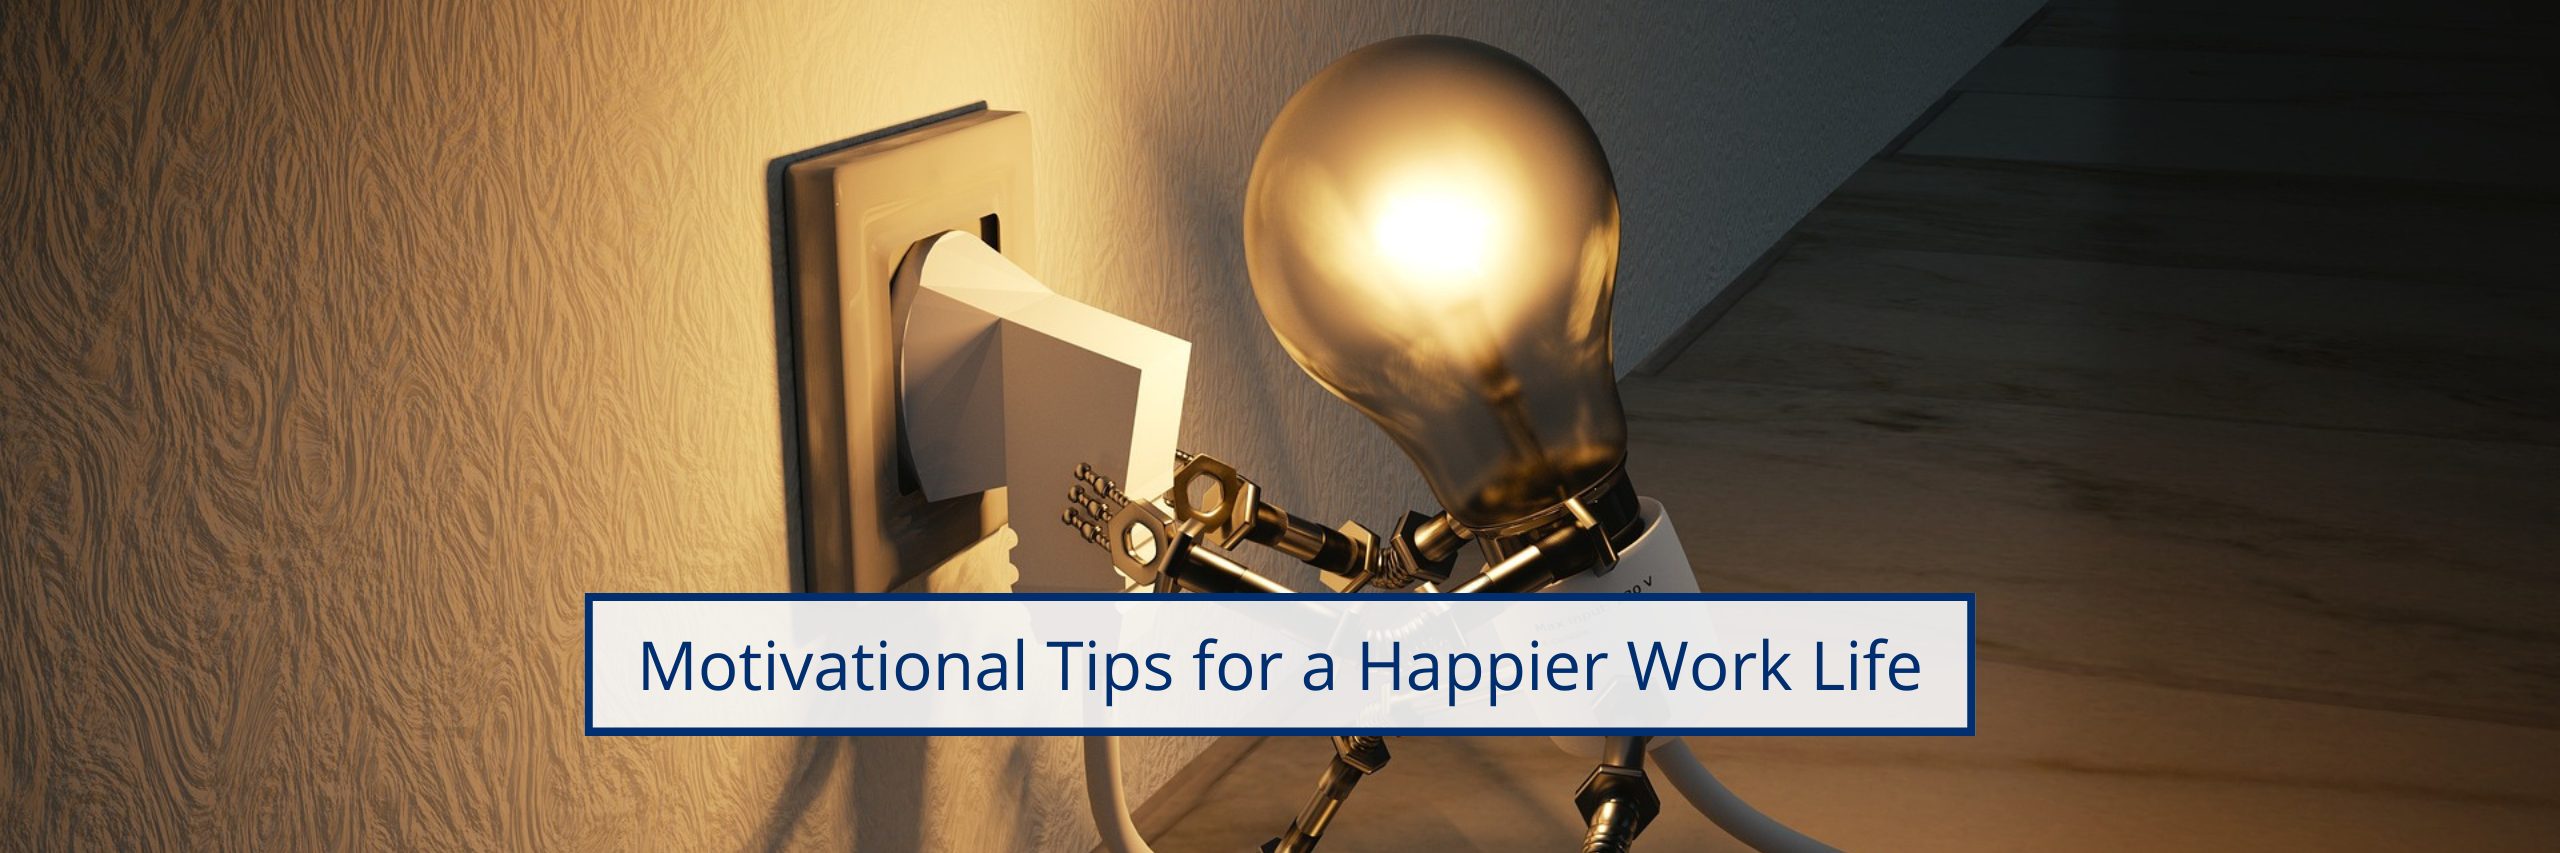 Motivational Tips for a Happier Work Life